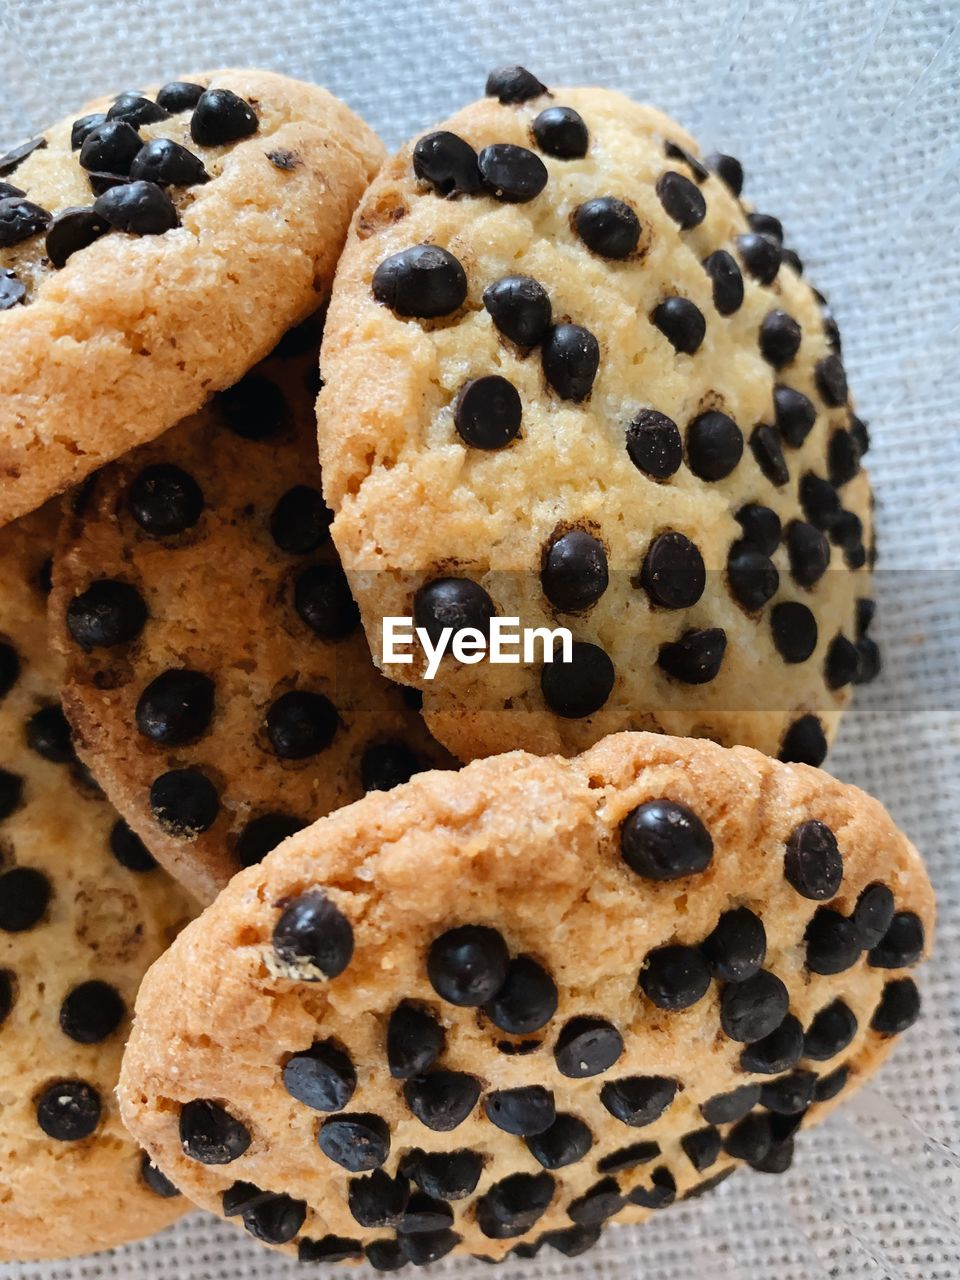 food, food and drink, baked, chocolate chip, sweet food, snack, cookies and crackers, raisin, dried food, chocolate chip cookie, cookie, freshness, dried fruit, no people, close-up, dessert, still life, produce, sweet, indoors, fruit, breakfast, dish, high angle view, blueberry, seed, berry